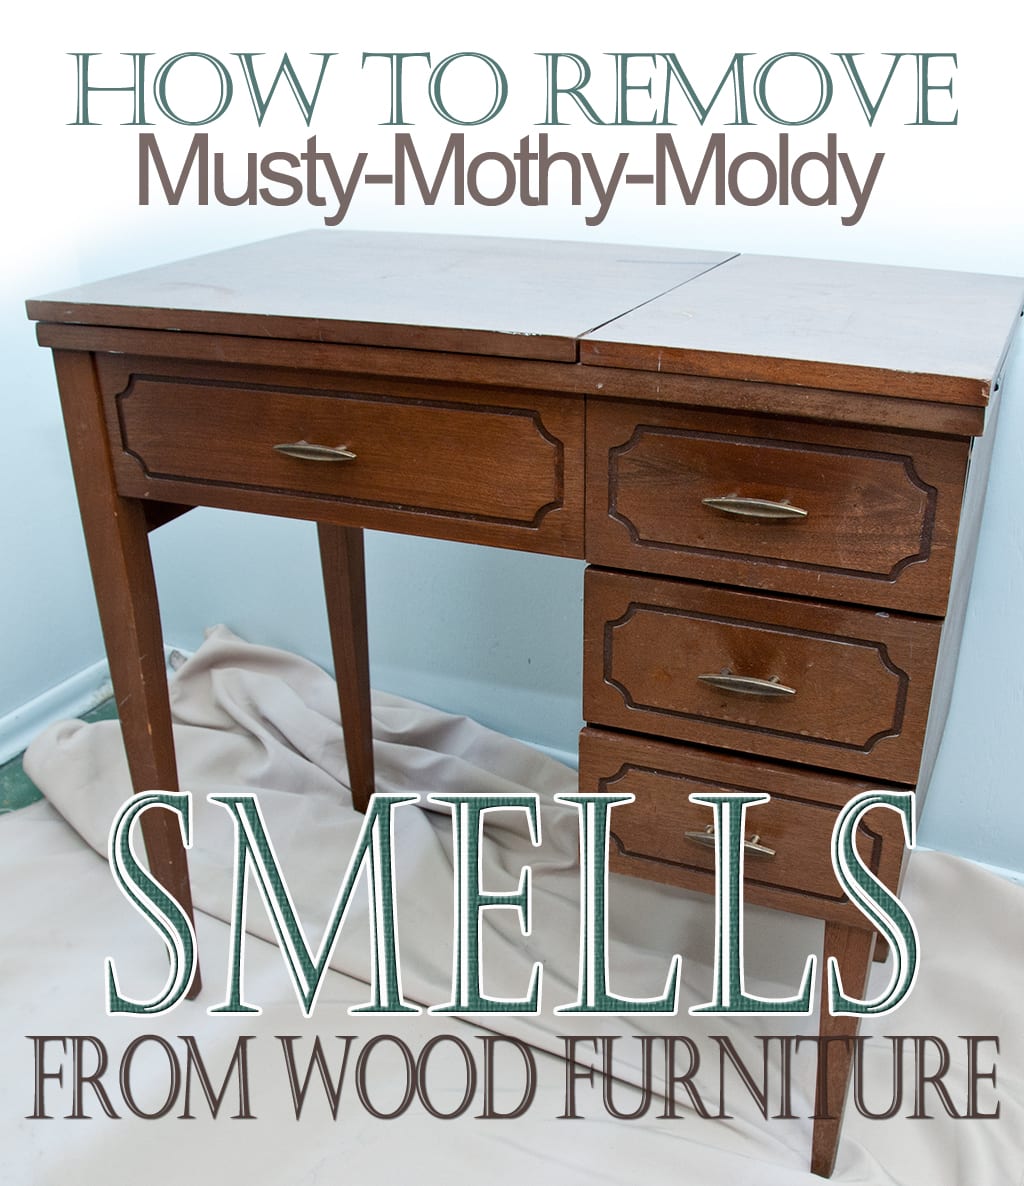 How To Remove Musty